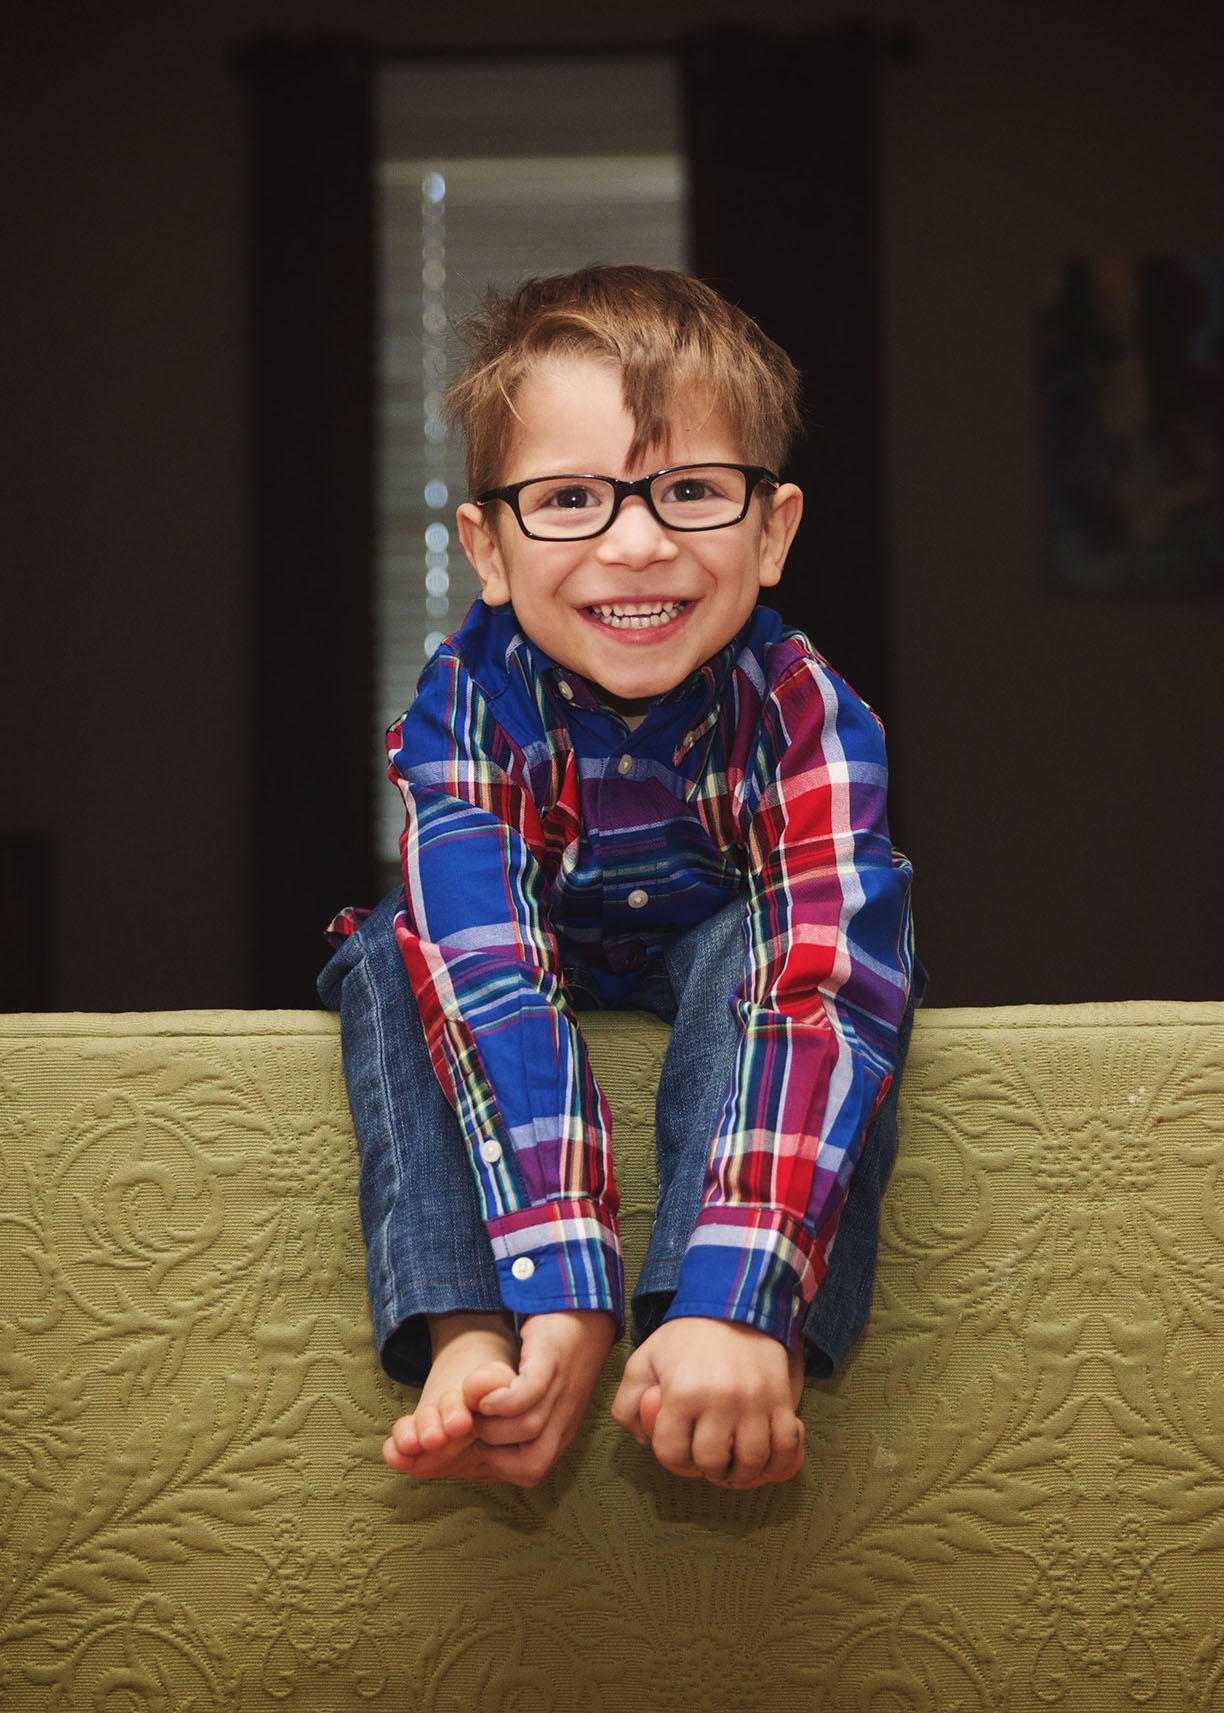 Sweet 4 year old with glasses portrait.jpg